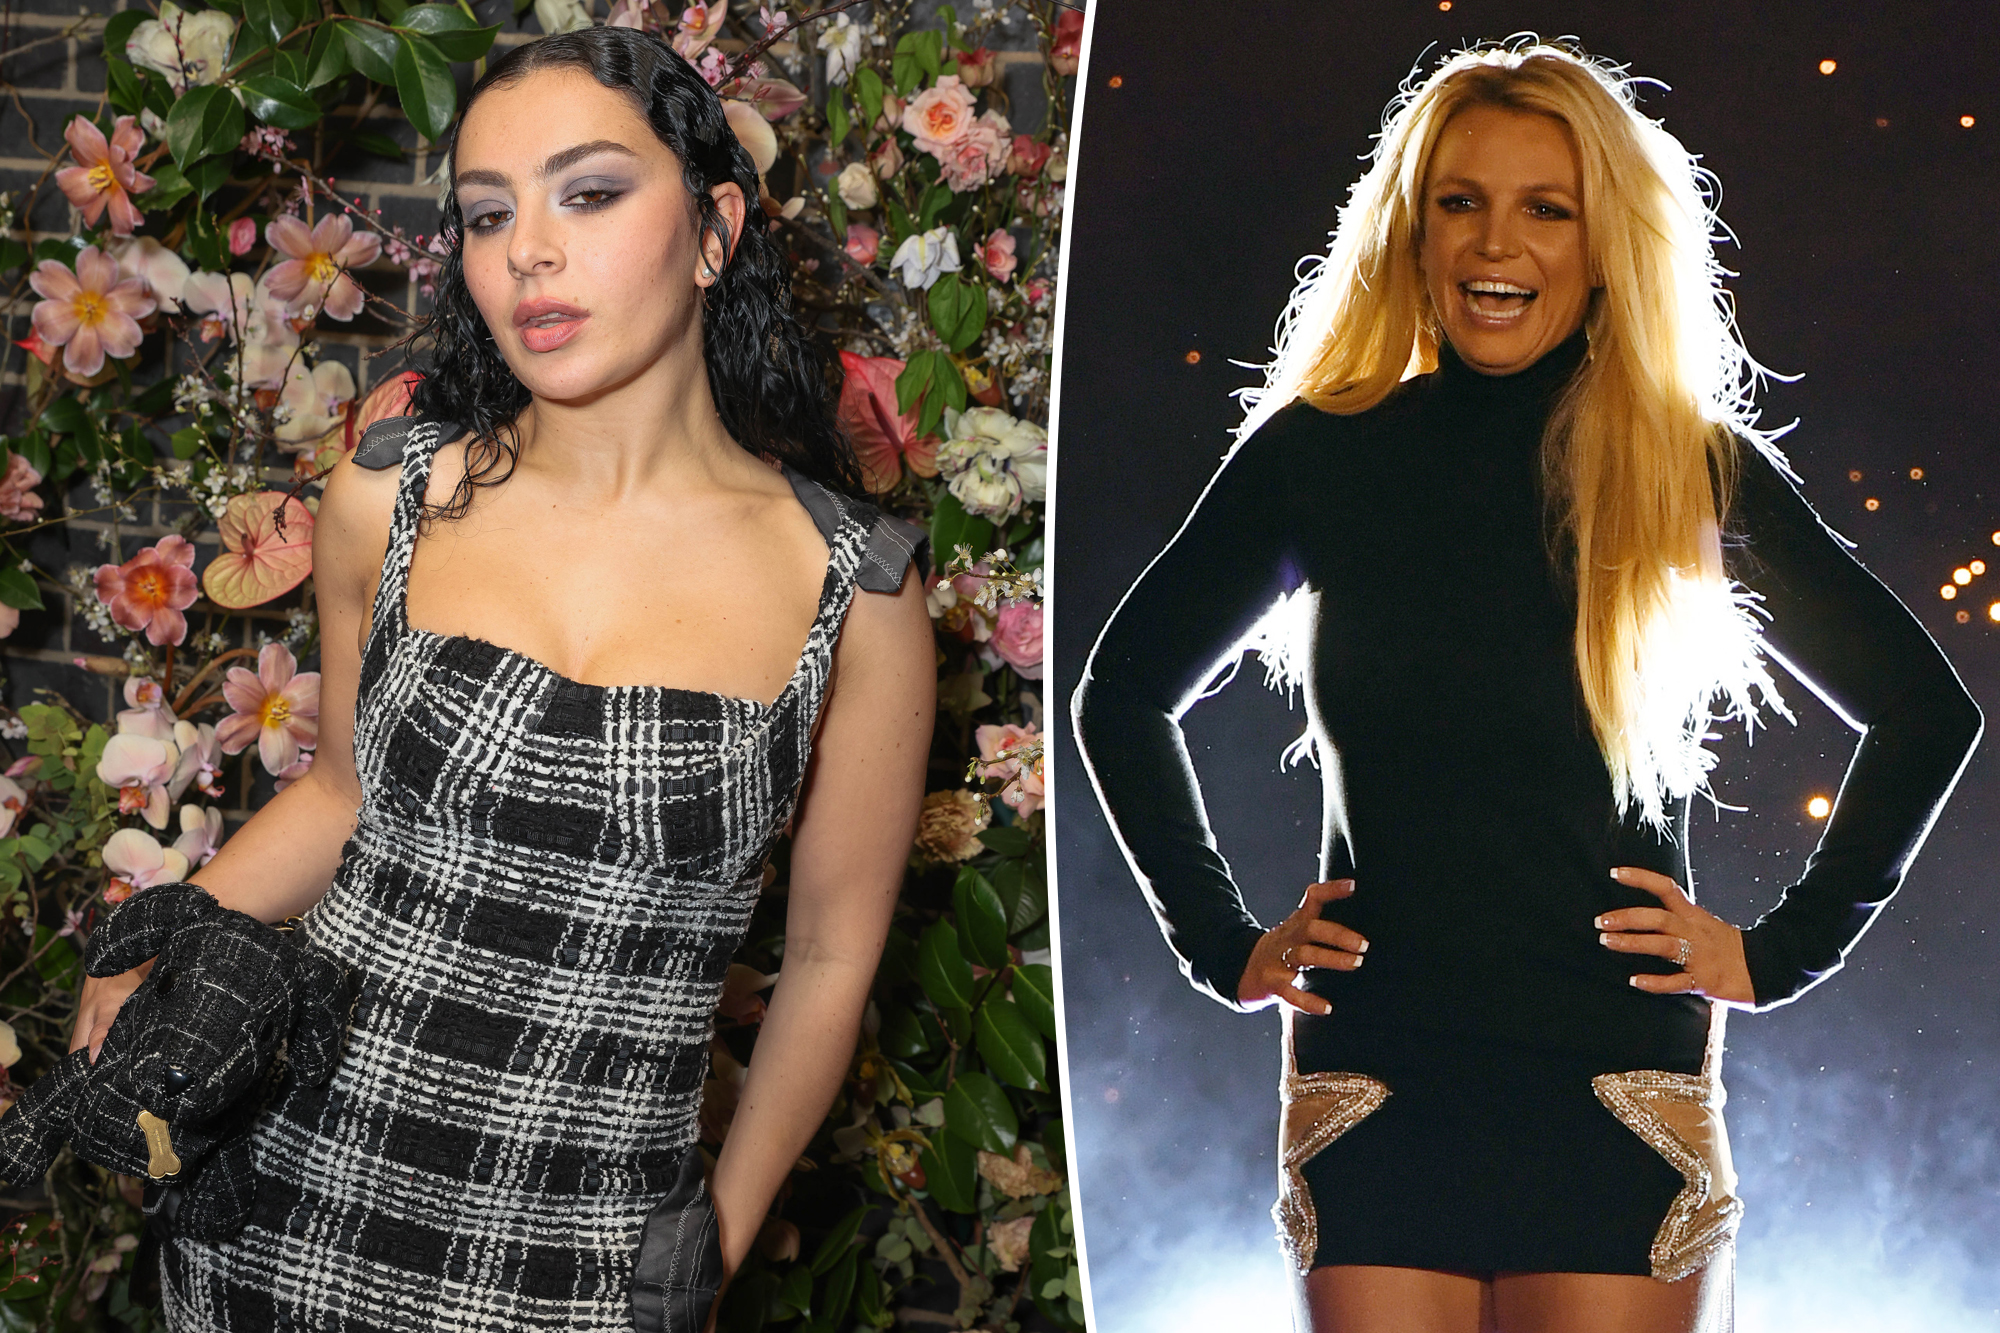 Britney Spears' Potential New Album: Charli XCX's Songwriting Confirmed